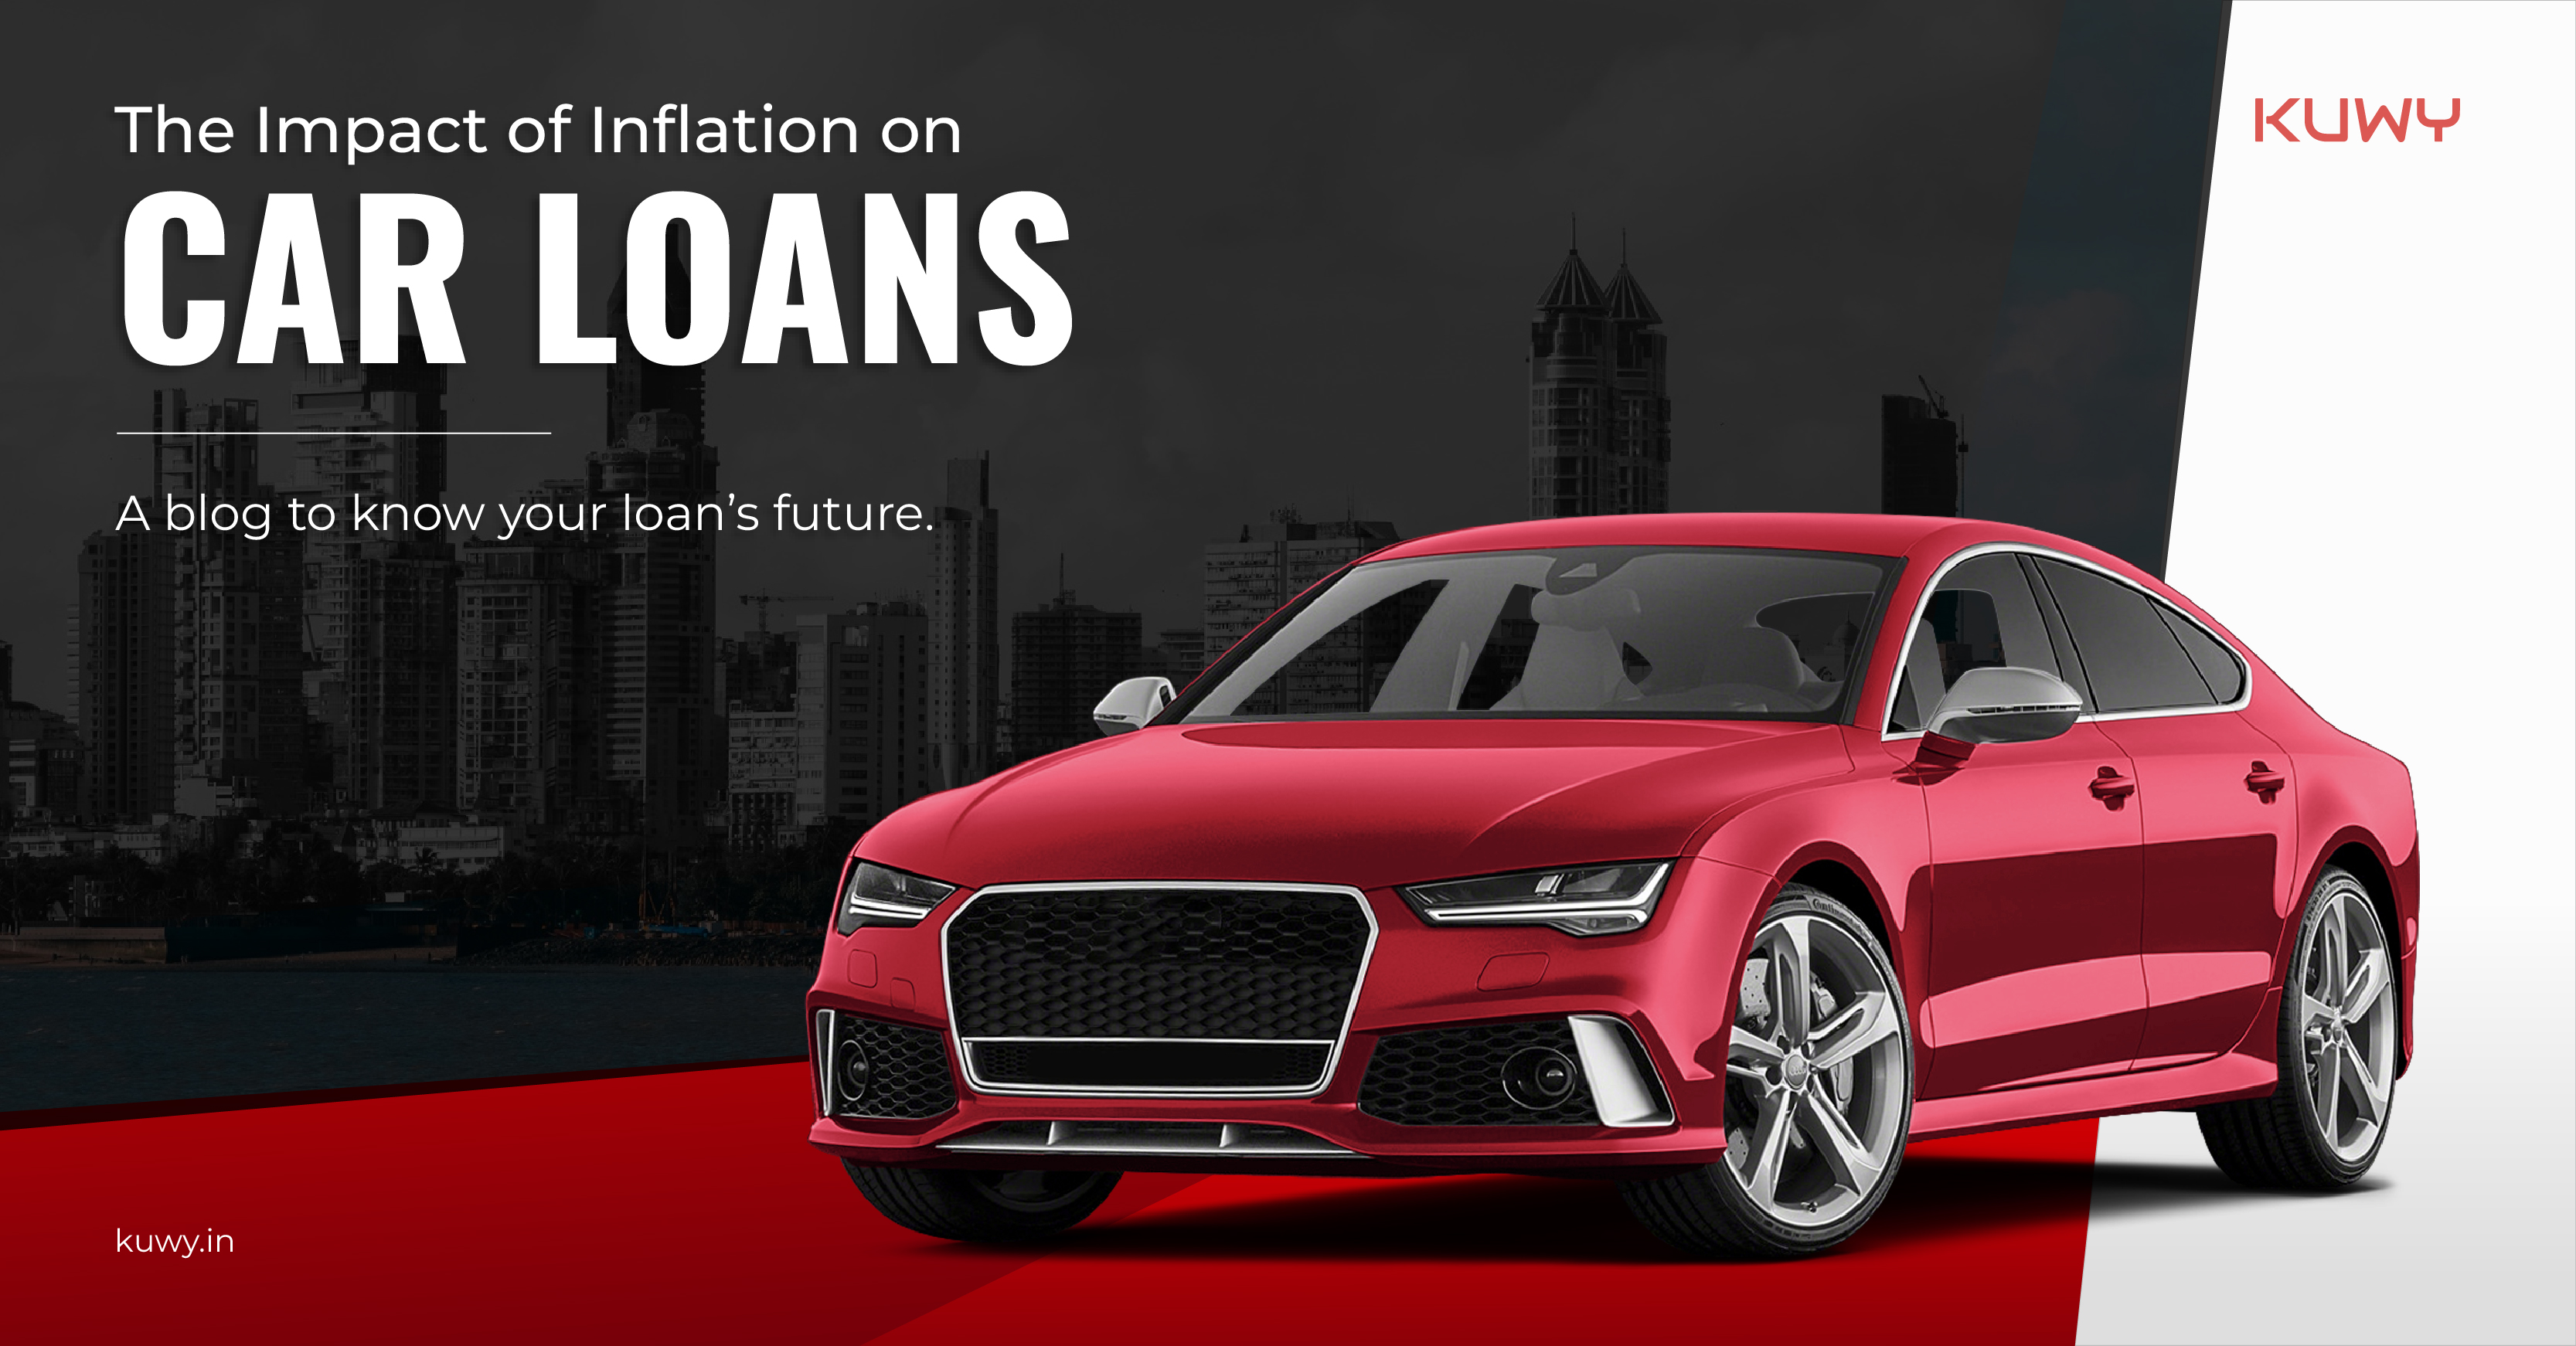 The Impact of Inflation on Car Loans: A Blog to Know Your Loan’s Future